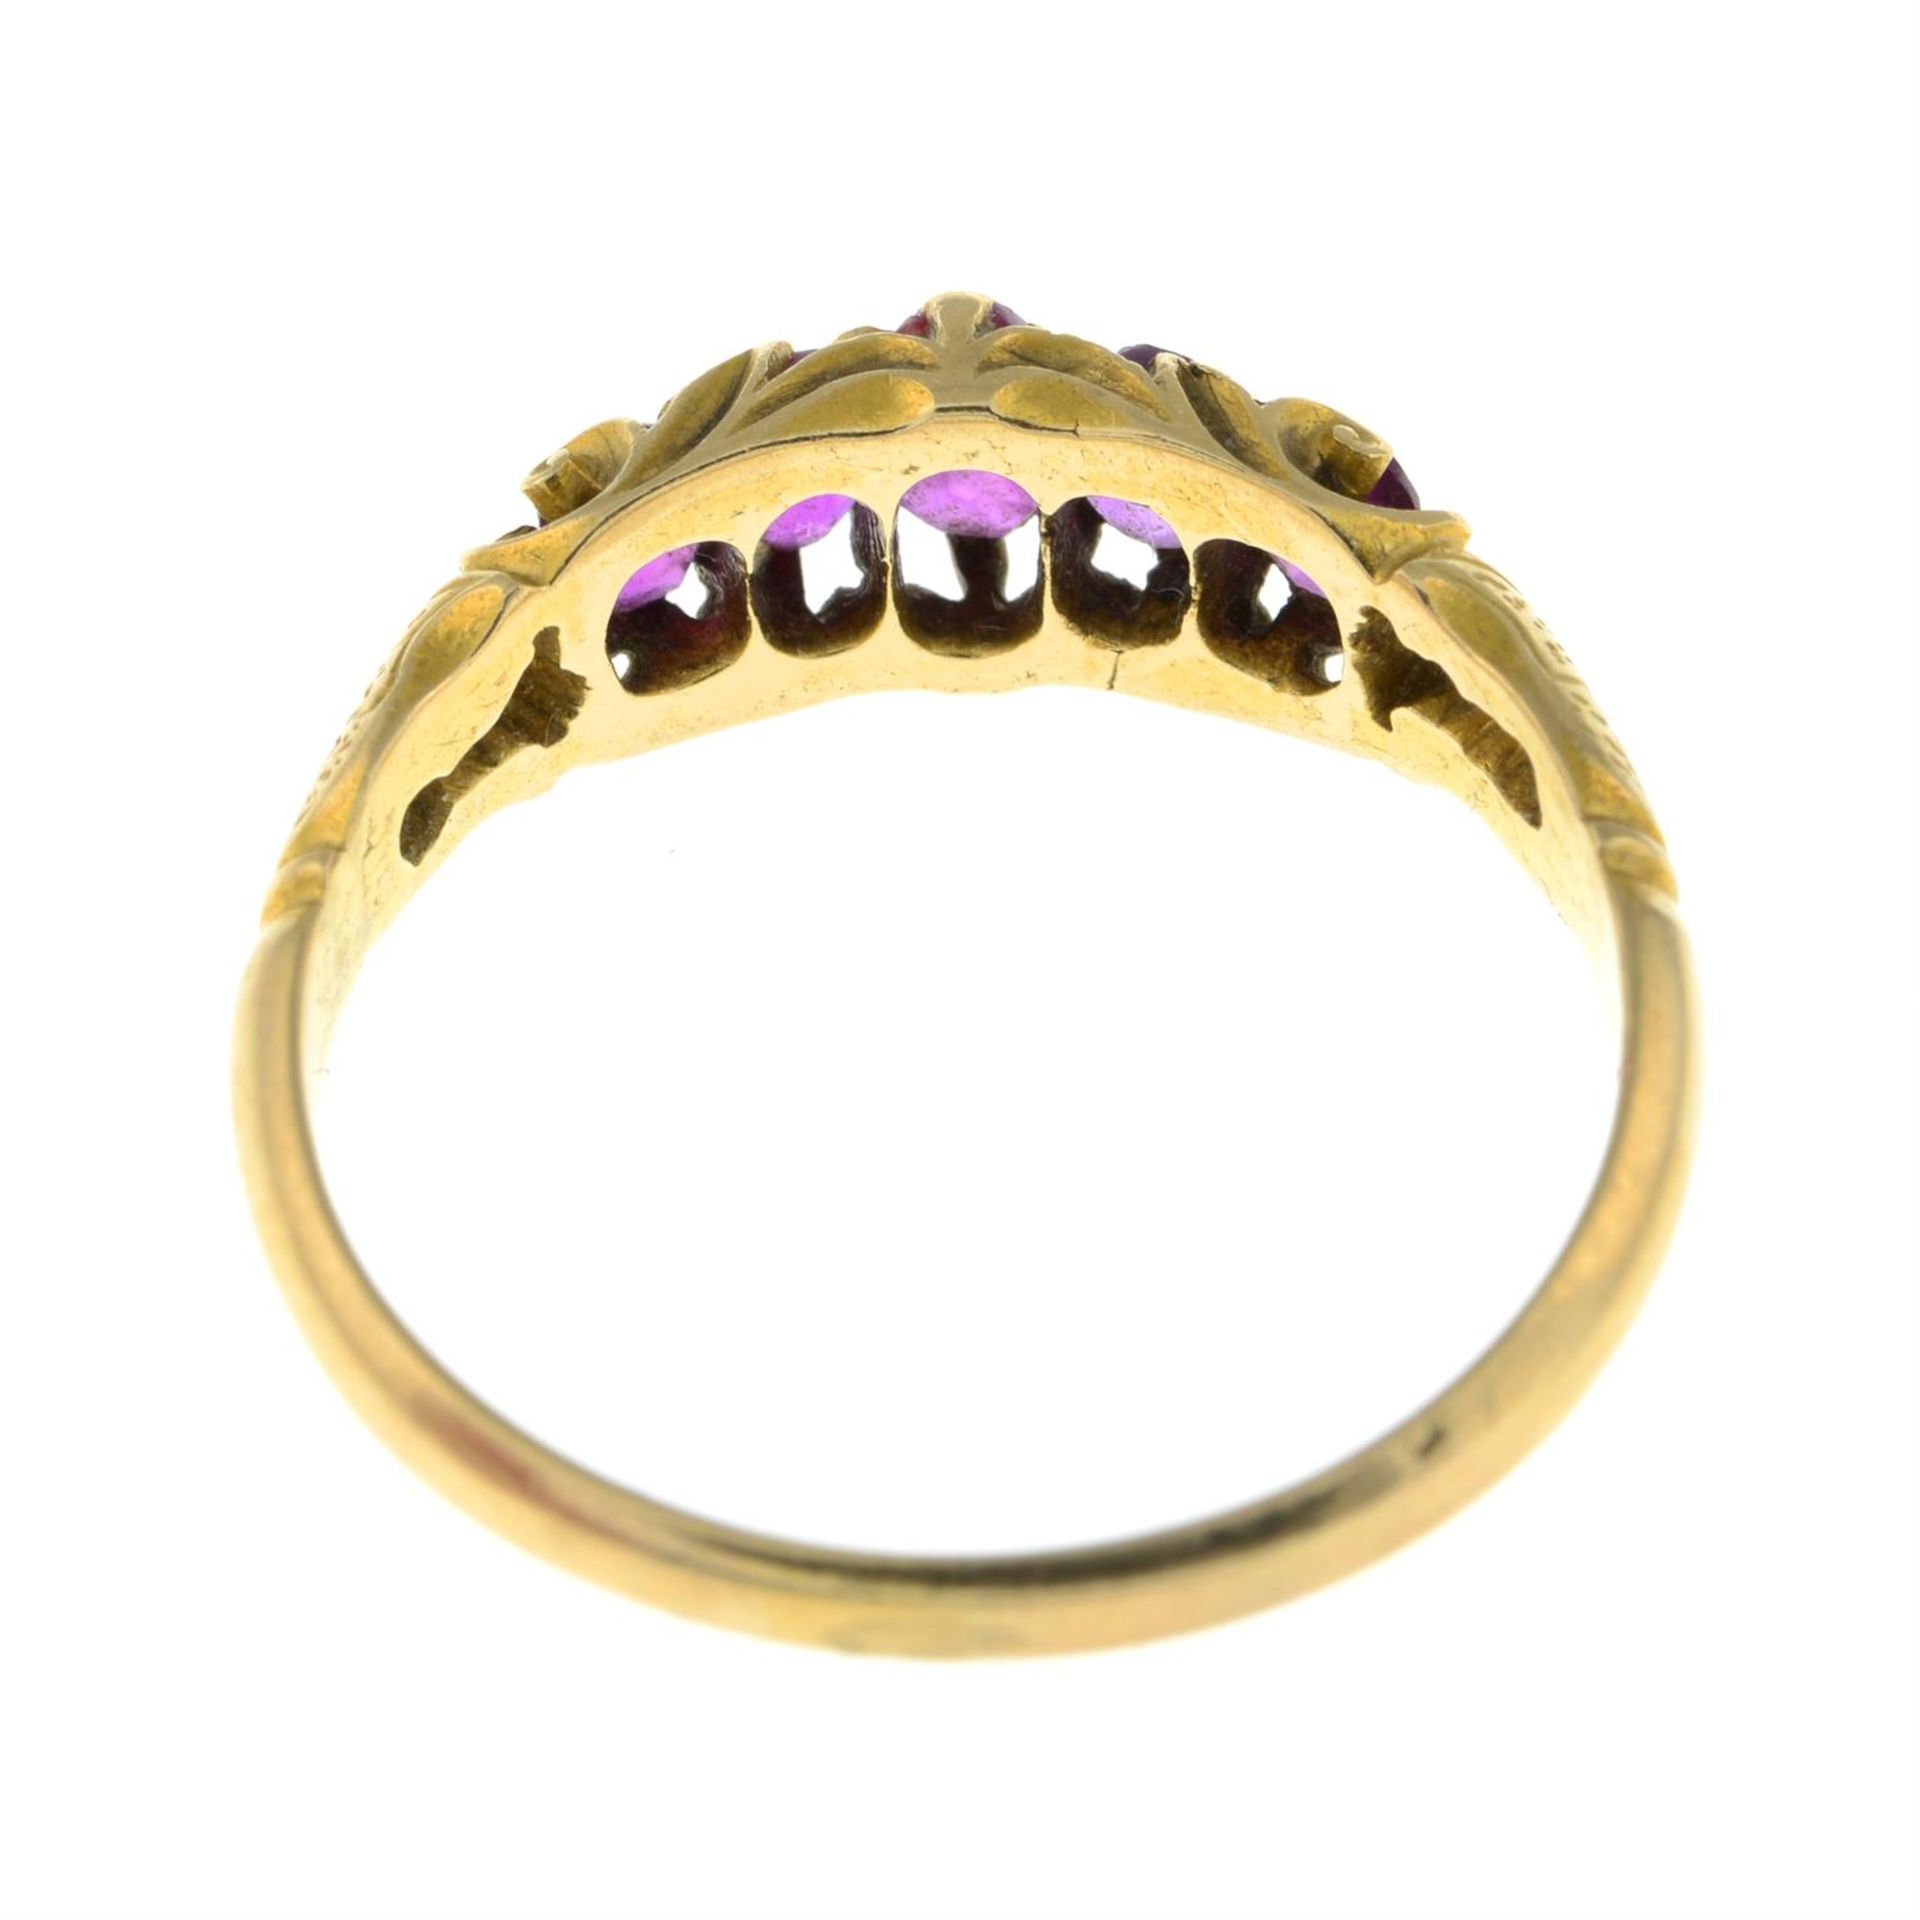 15ct Gold Antique Ruby Five Stone Ring (2.4g - Image 2 of 2